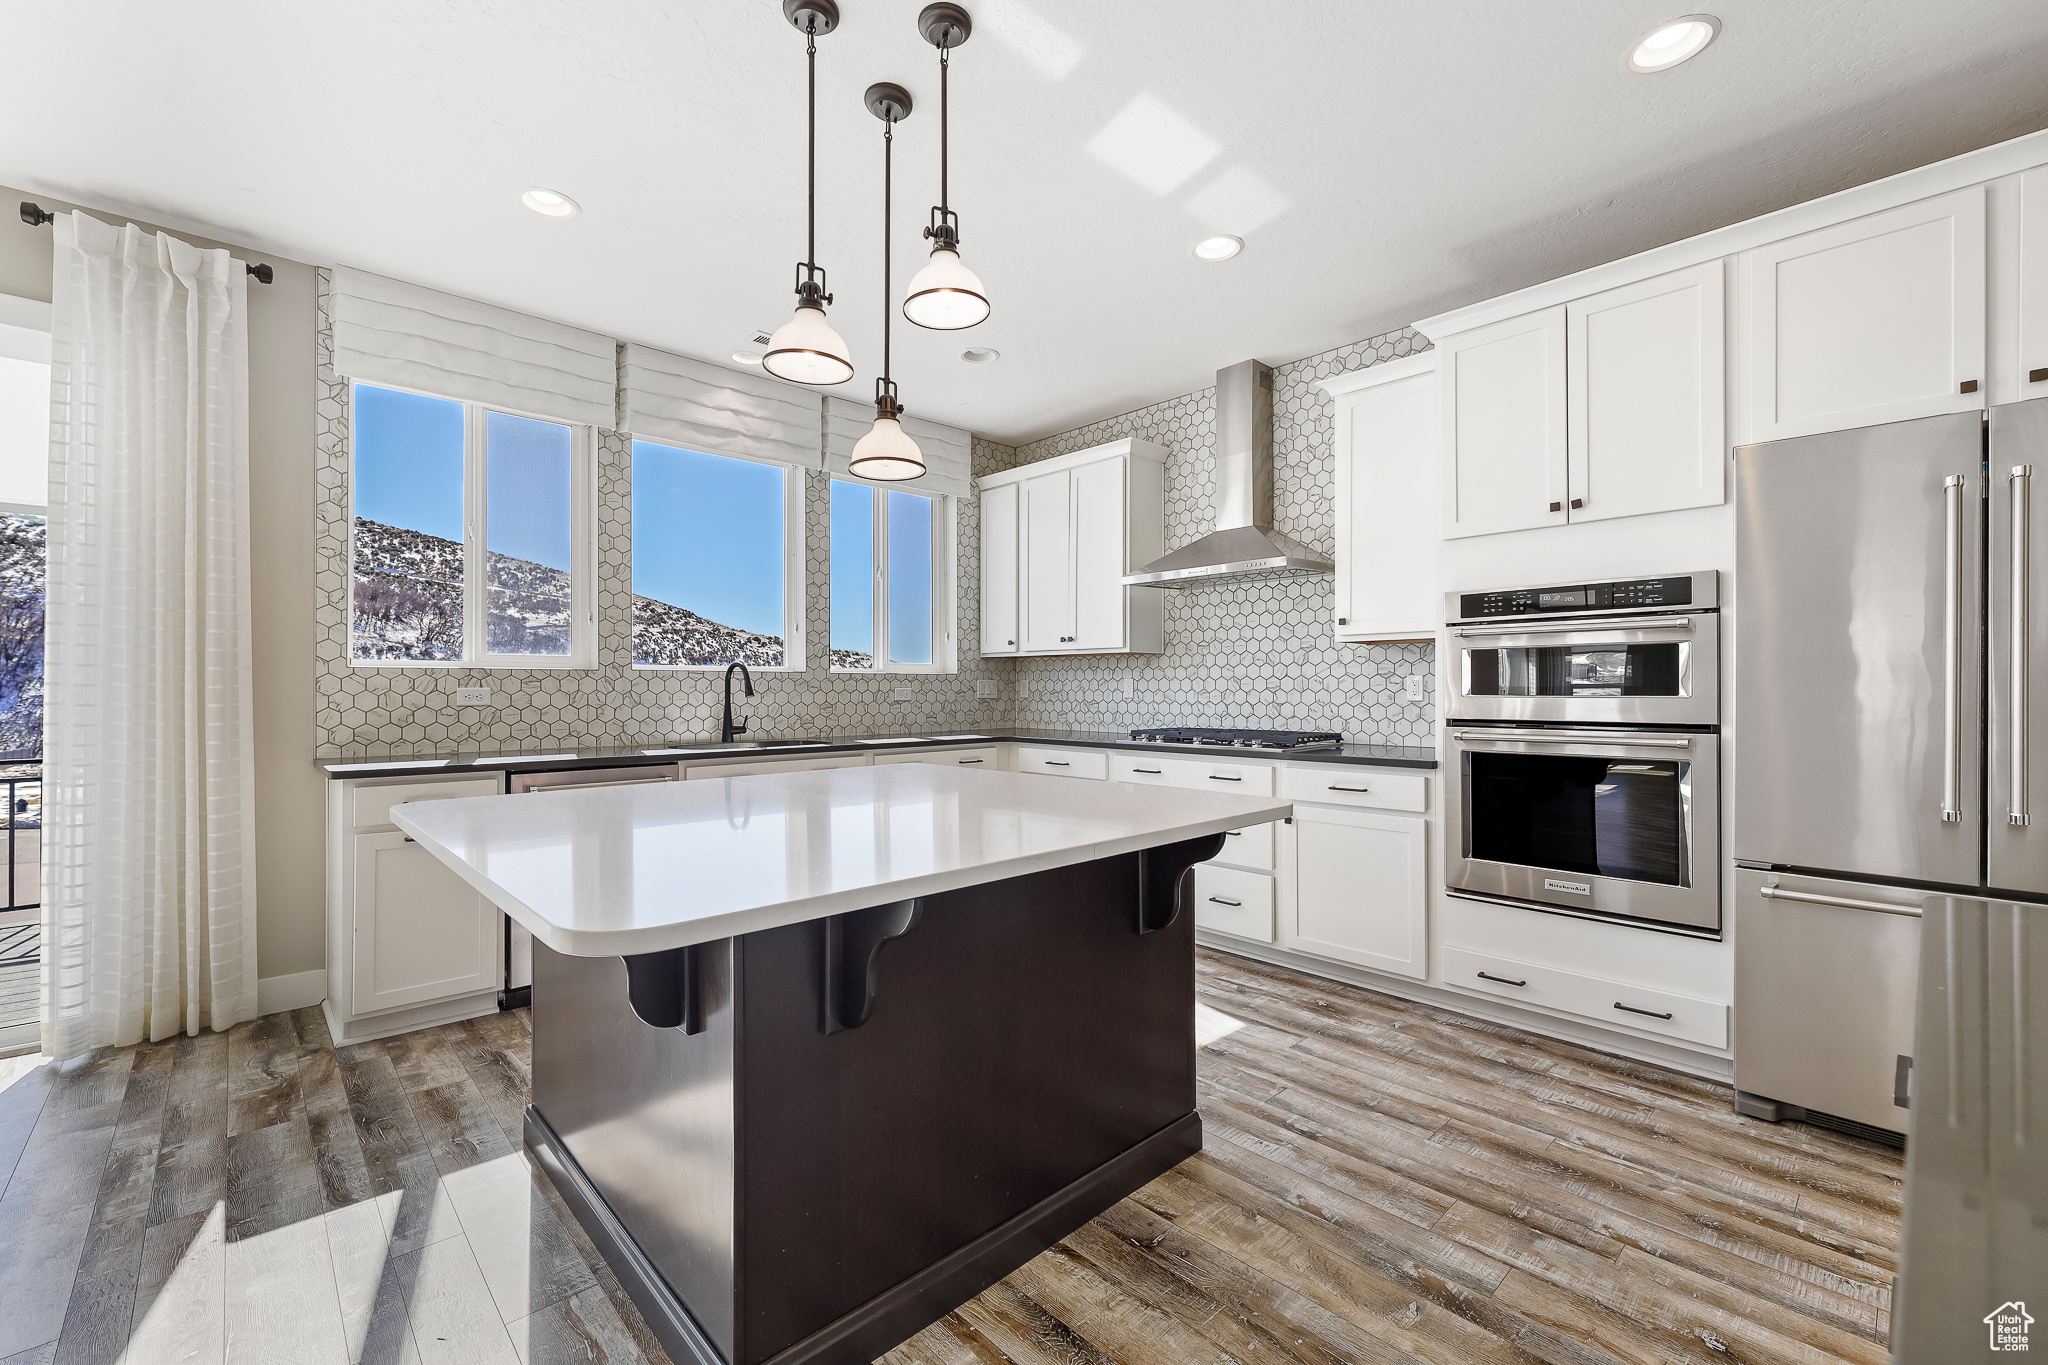 Kitchen featuring a kitchen island, wall chimney exhaust hood, appliances with stainless steel finishes, decorative light fixtures, and a breakfast bar area